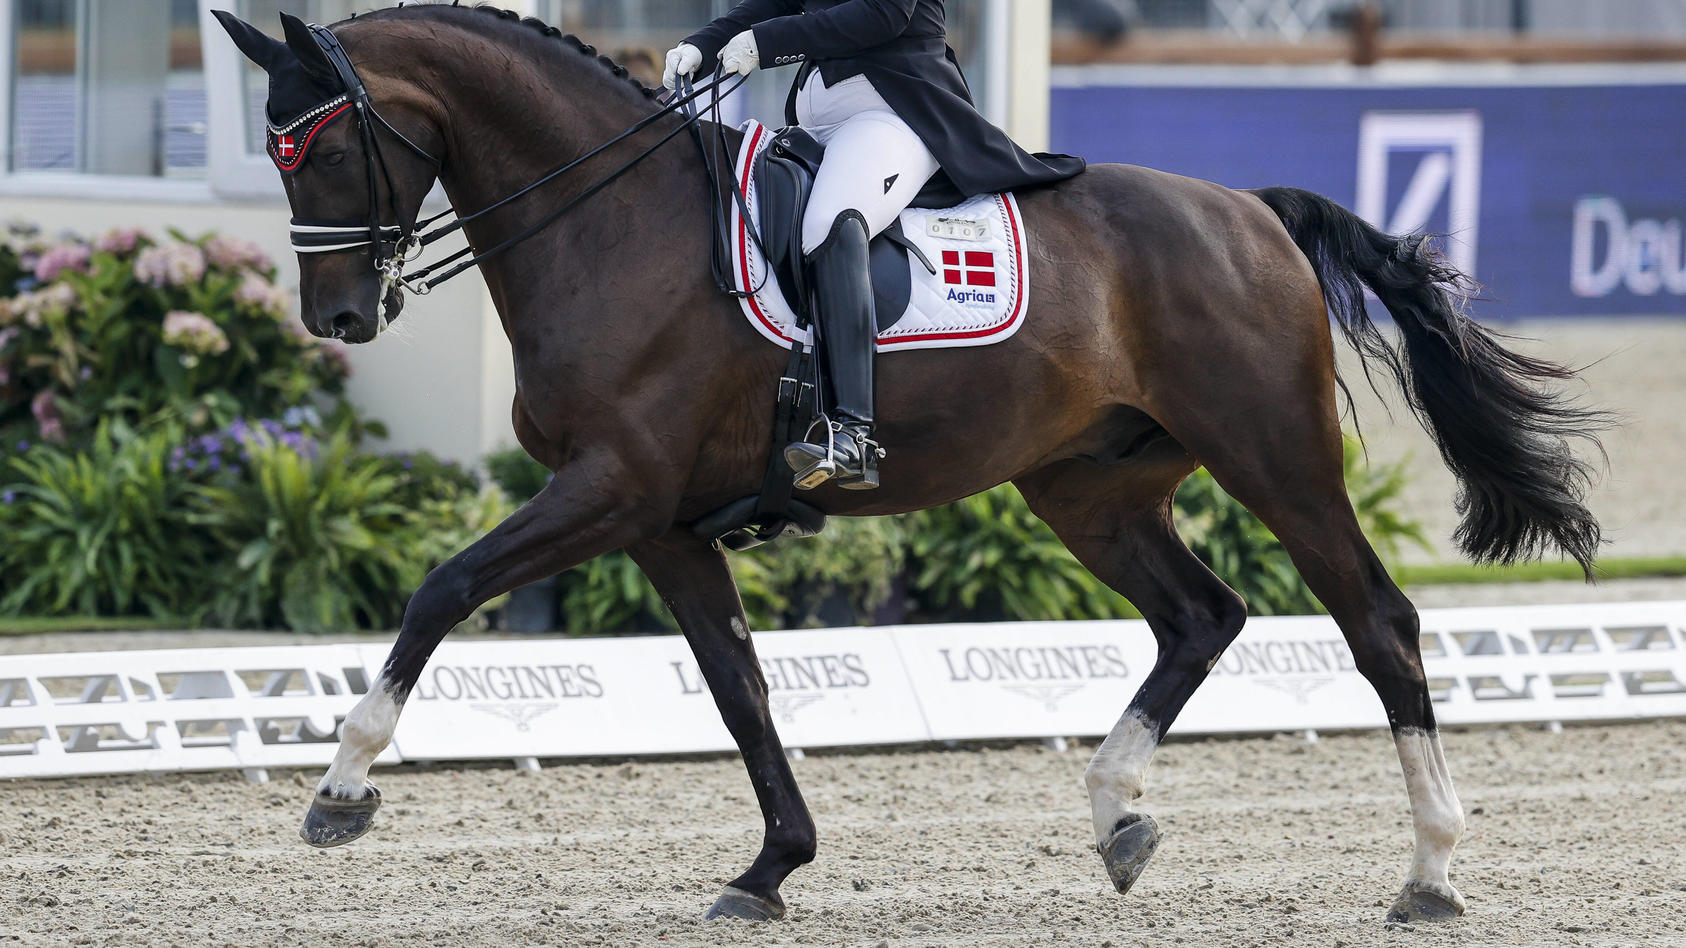 HAGEN - FEI Dressage European Championships 2021, HAGEN - FEI Dressage European Championships 2021 SKOV Emma DEN, Cracker Jack U25 Grand Prix Part A Individual Competition supported by Liselott und Klaus Rheinberger Stiftung presented by BEMER INT. A